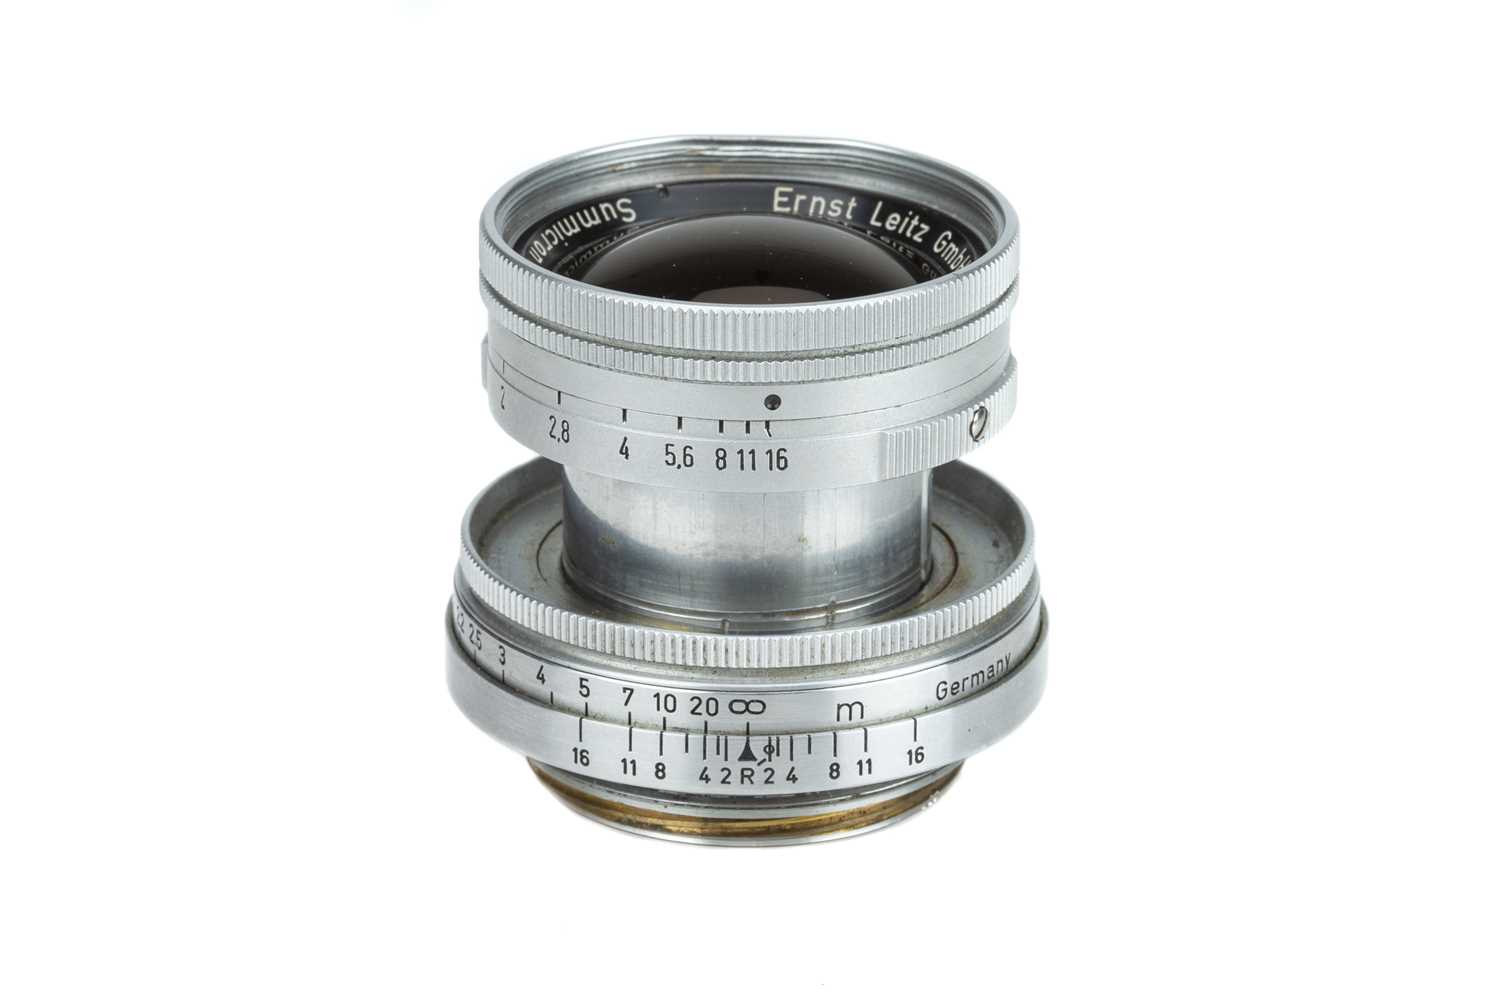 Lot 36 - A Leitz Attrappe Summicron f/2 50mm Lens